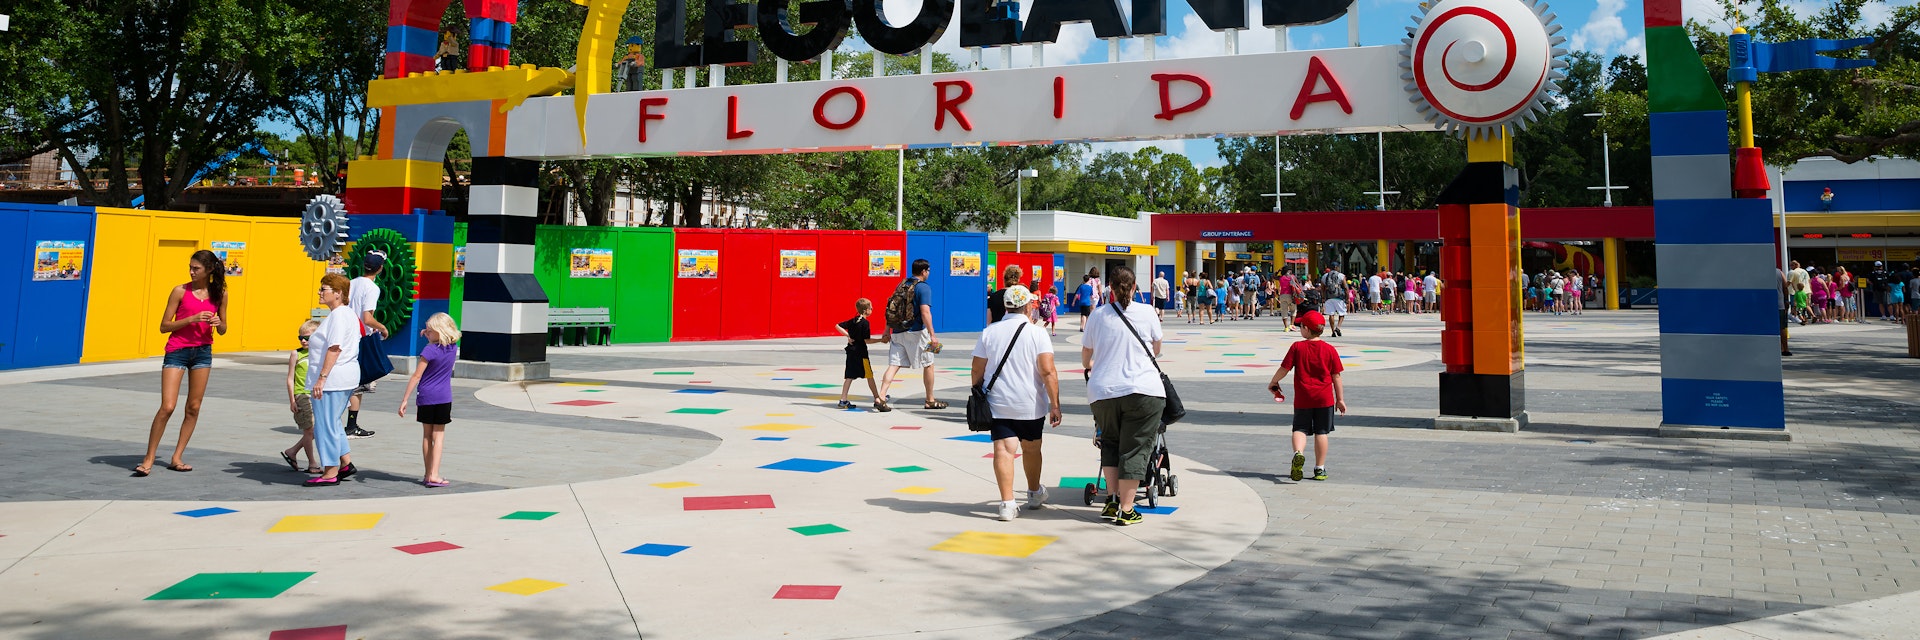 WINTER HAVEN, FL - June 18, 2014: Visitors pass through the entrance to Legoland Florida in Winter Haven, FL, on June 18, 2014.